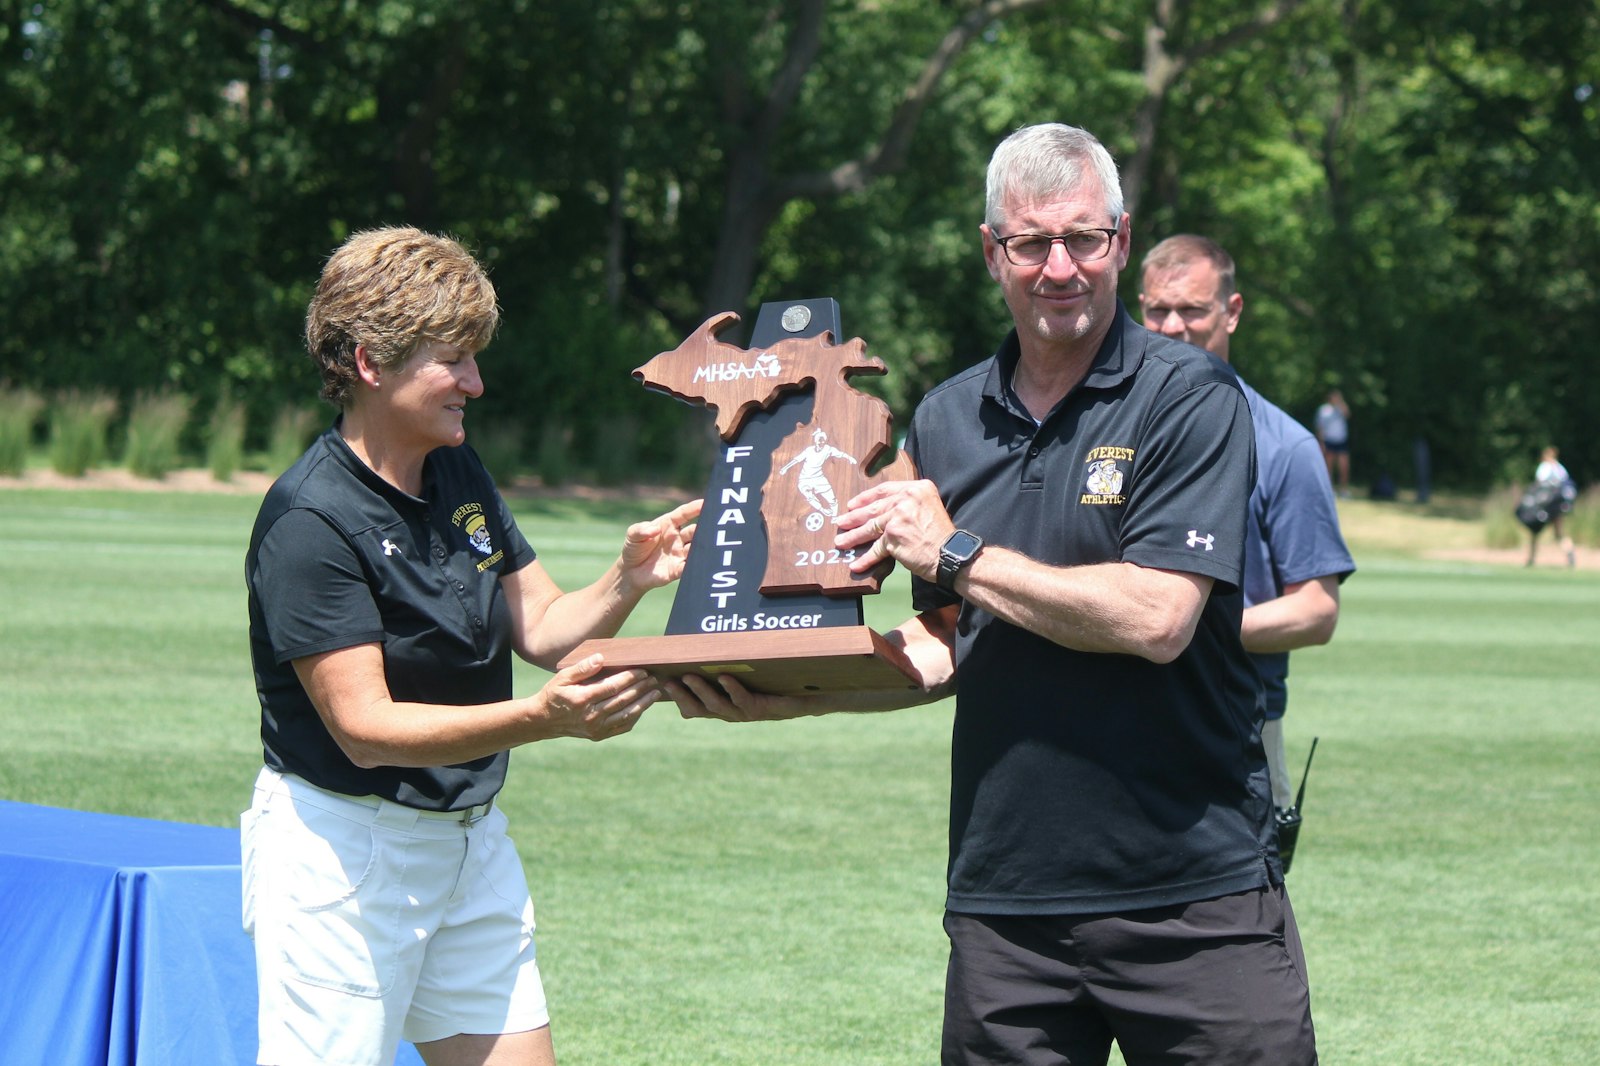 Clarkston Everest Collegiate/Bloomfield Hills Academy of the Sacred Heart soccer coach Richard Cross accepts the state runner-up trophy from Everest athletic director Ann Lowney after the Mountaineers fell to Kalamazoo Christian, 5-0, at Michigan State University.